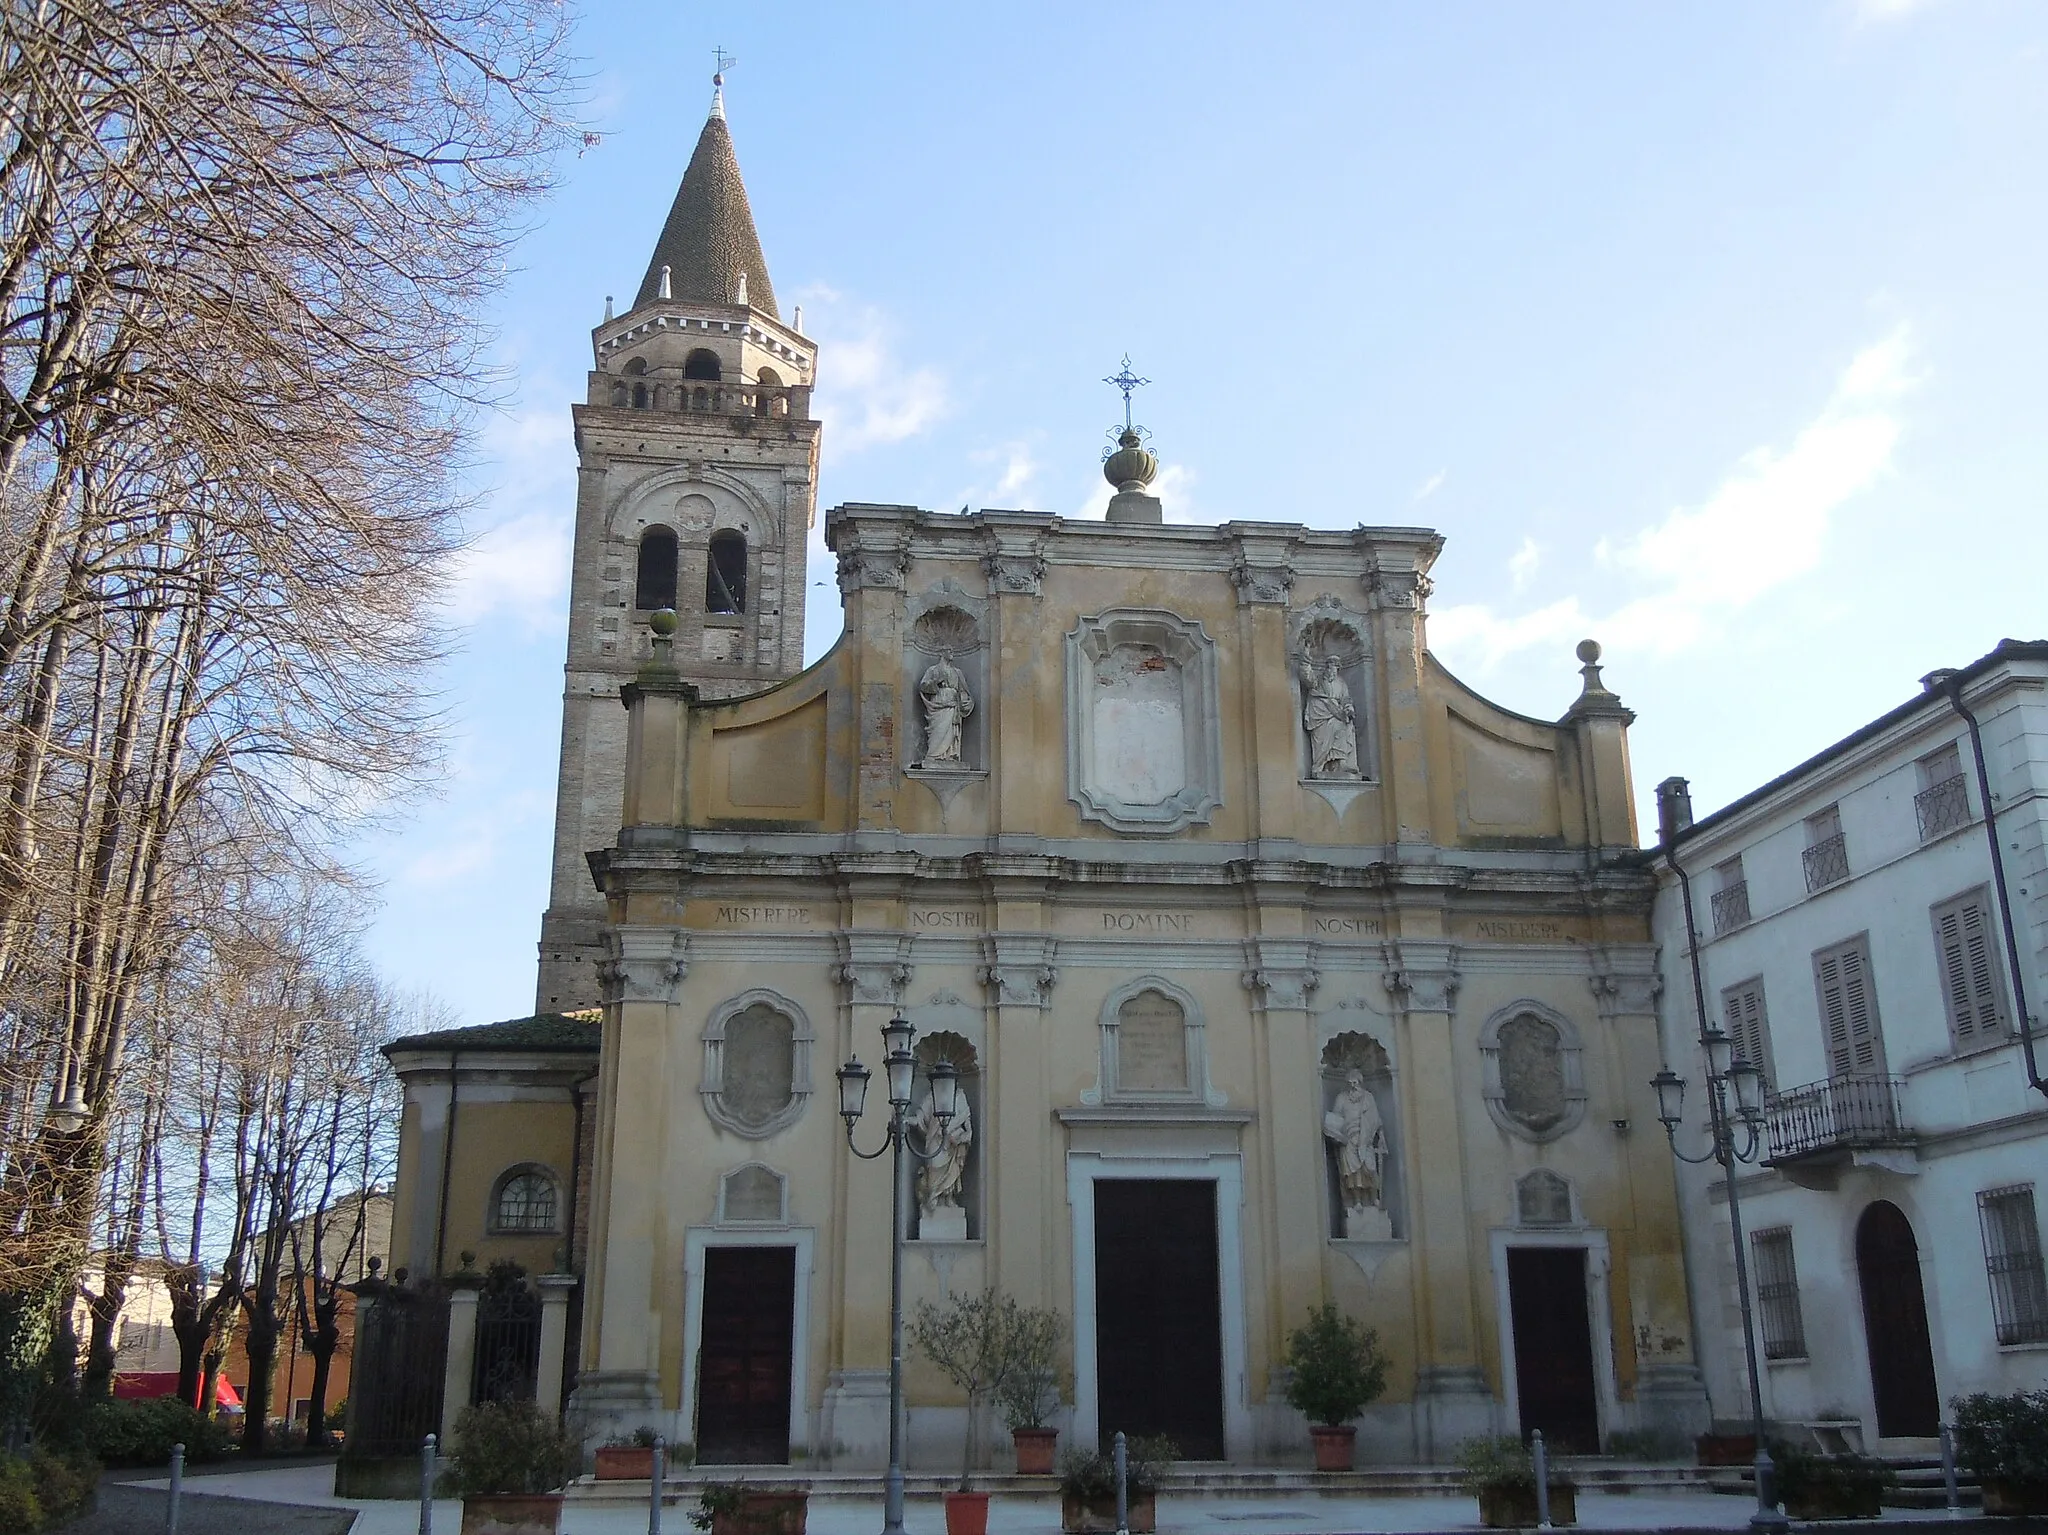 Image of Acquanegra sul Chiese